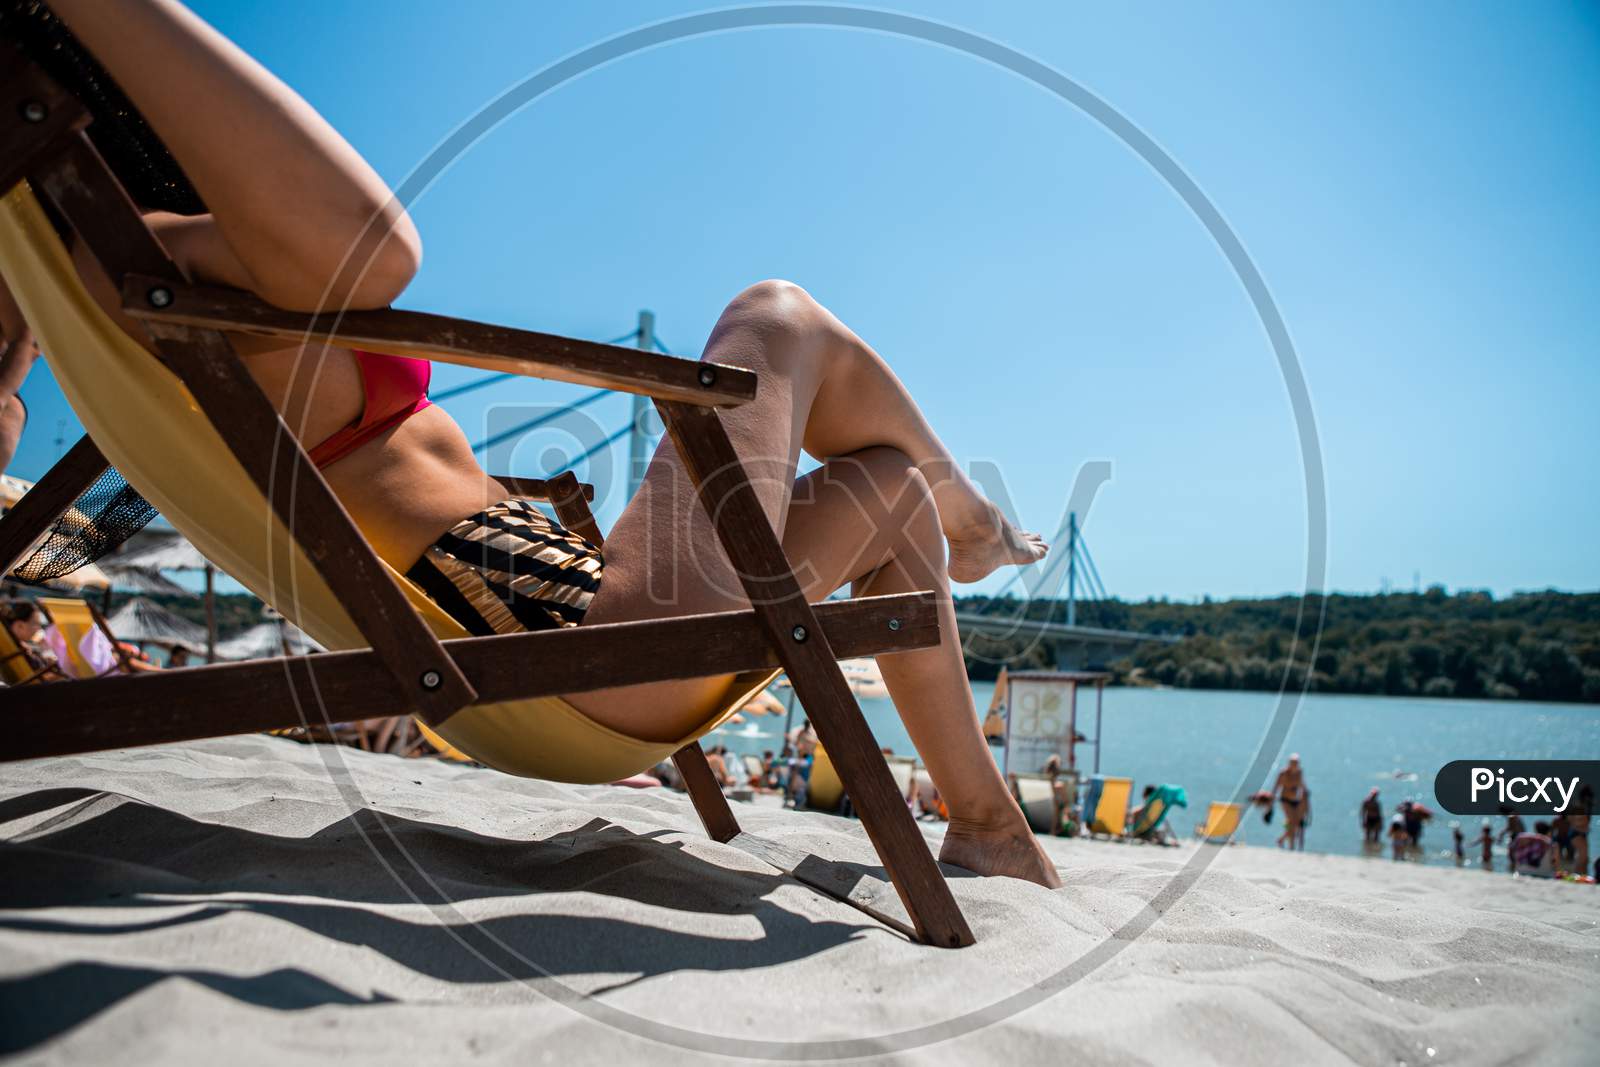 Selective Focus On The Legs Of An Attractive Young Woman Lying On A Yellow Couch On A Beach Steam. The Beach Is Sandy And Is Located On The River Bank And Behind Is A Bridge.